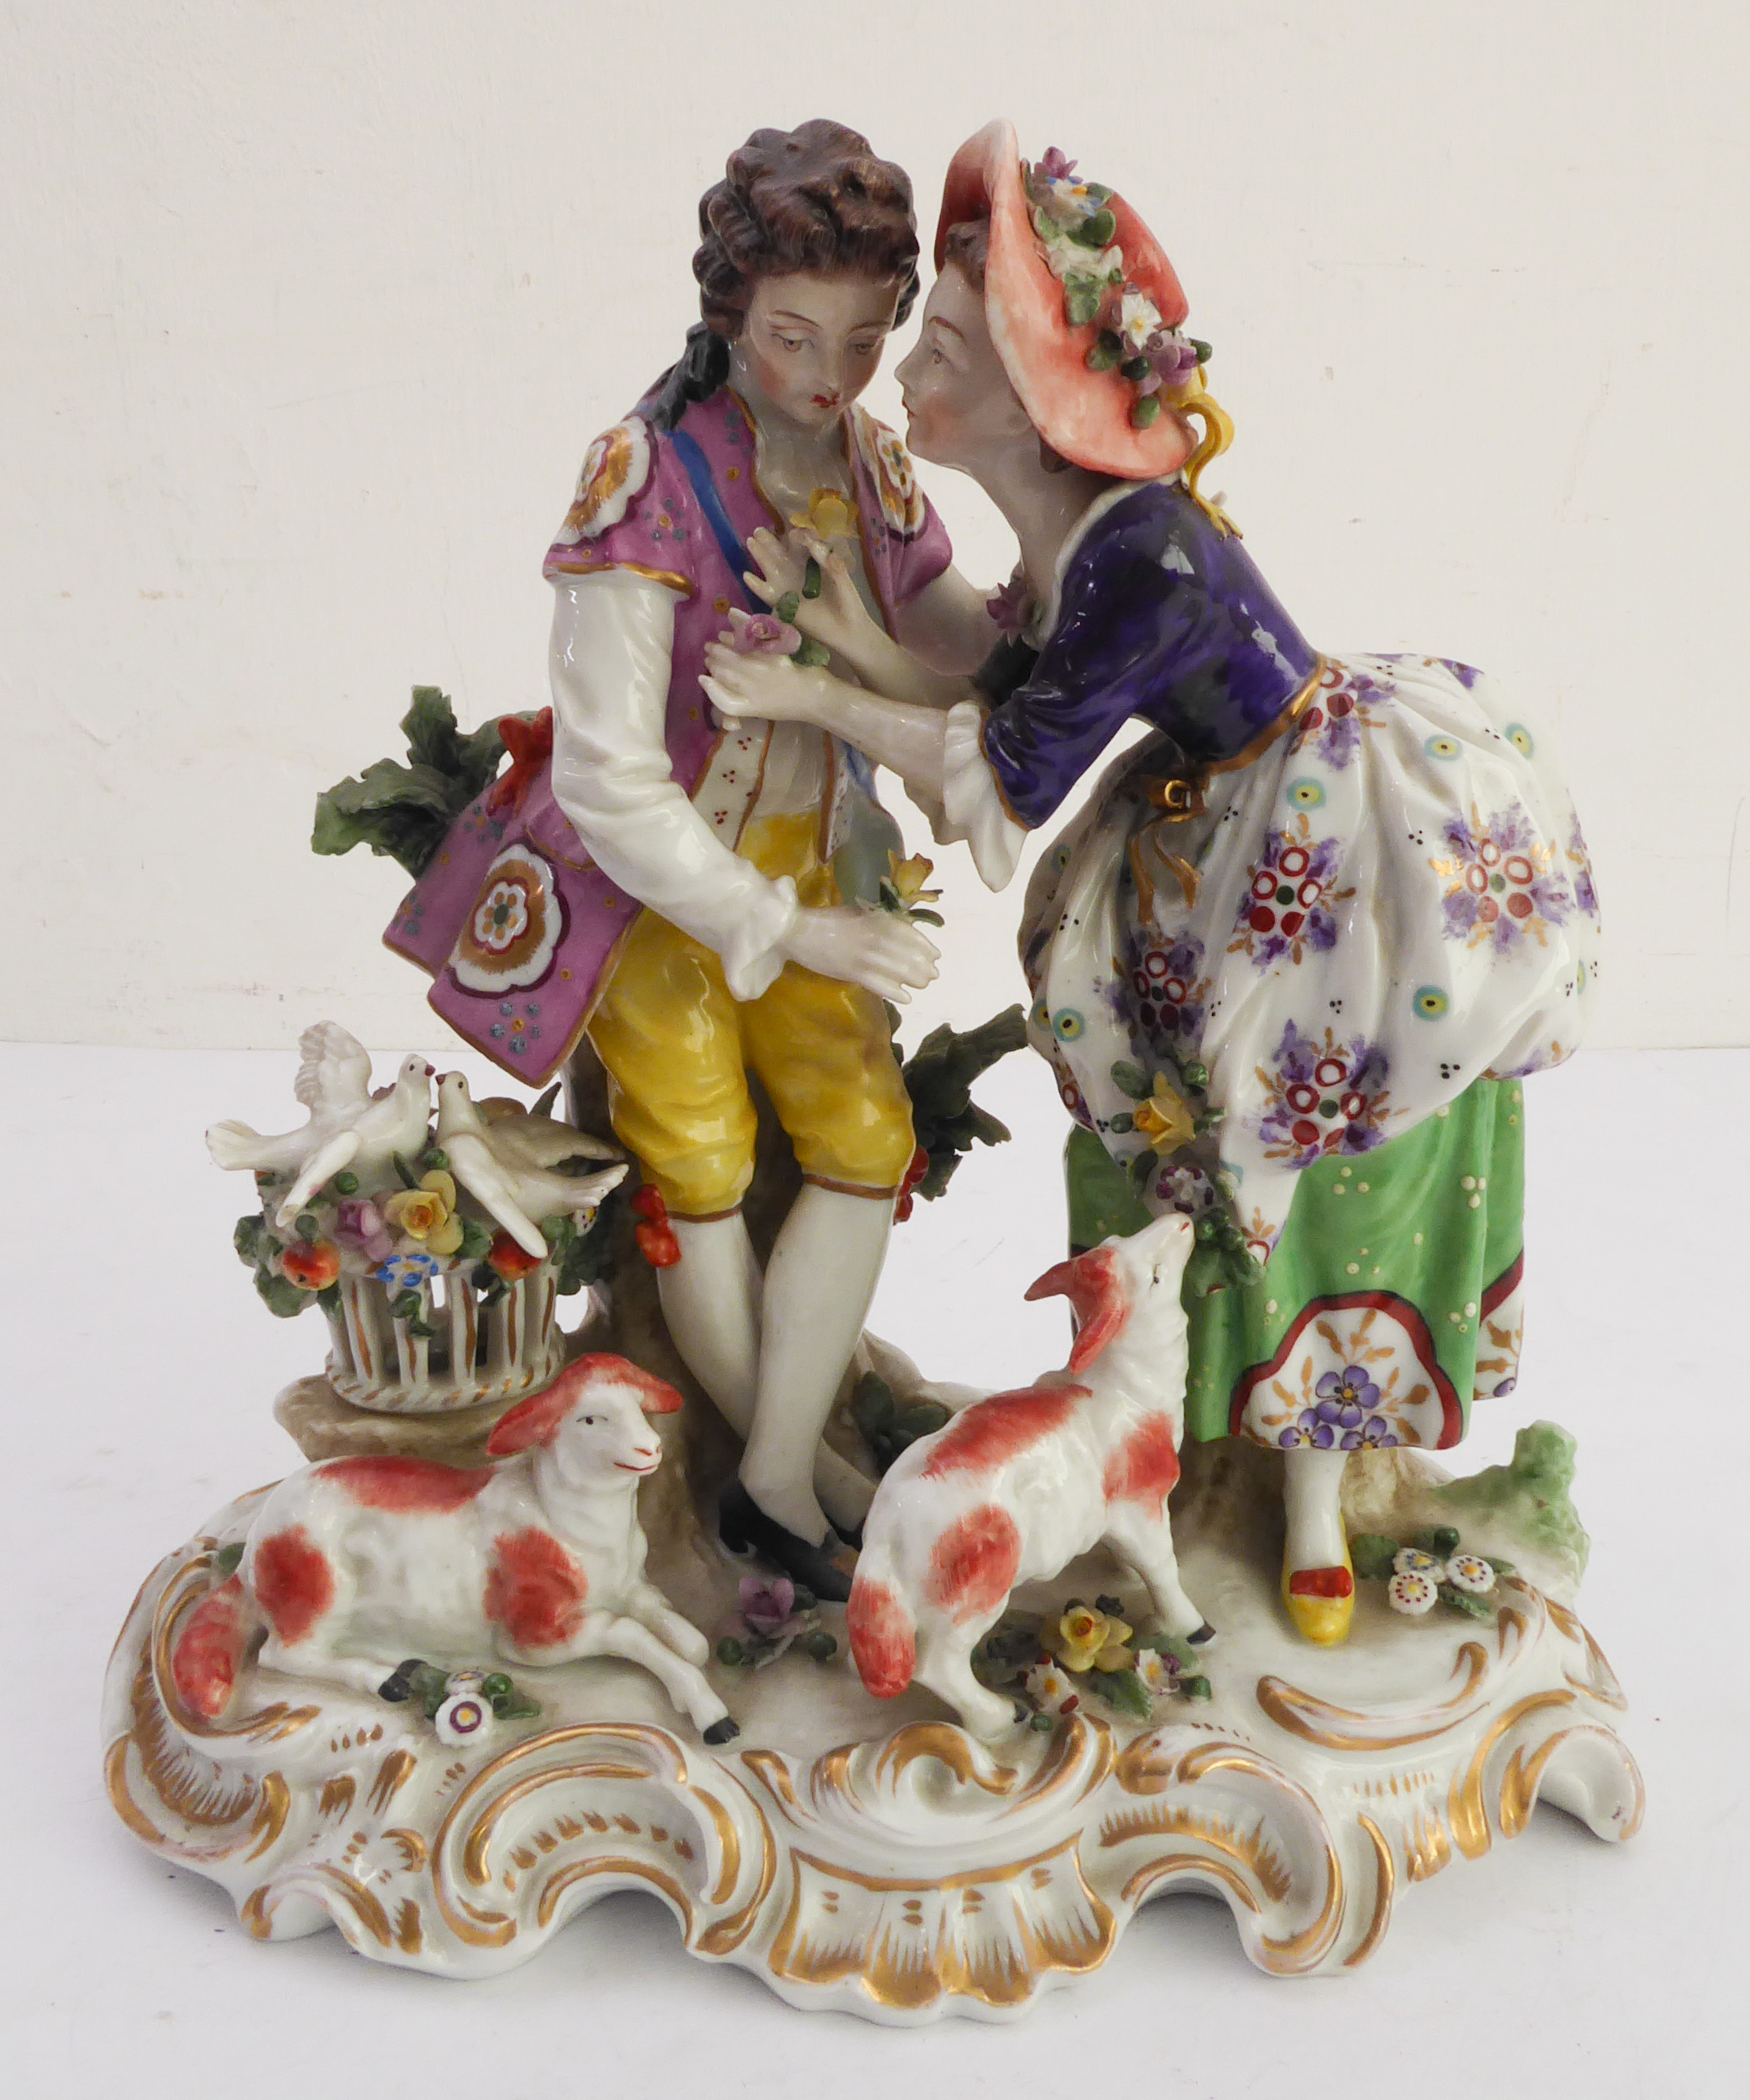 A hand-decorated late 19th / early 20th century Naples porcelain figure group - the female receiving